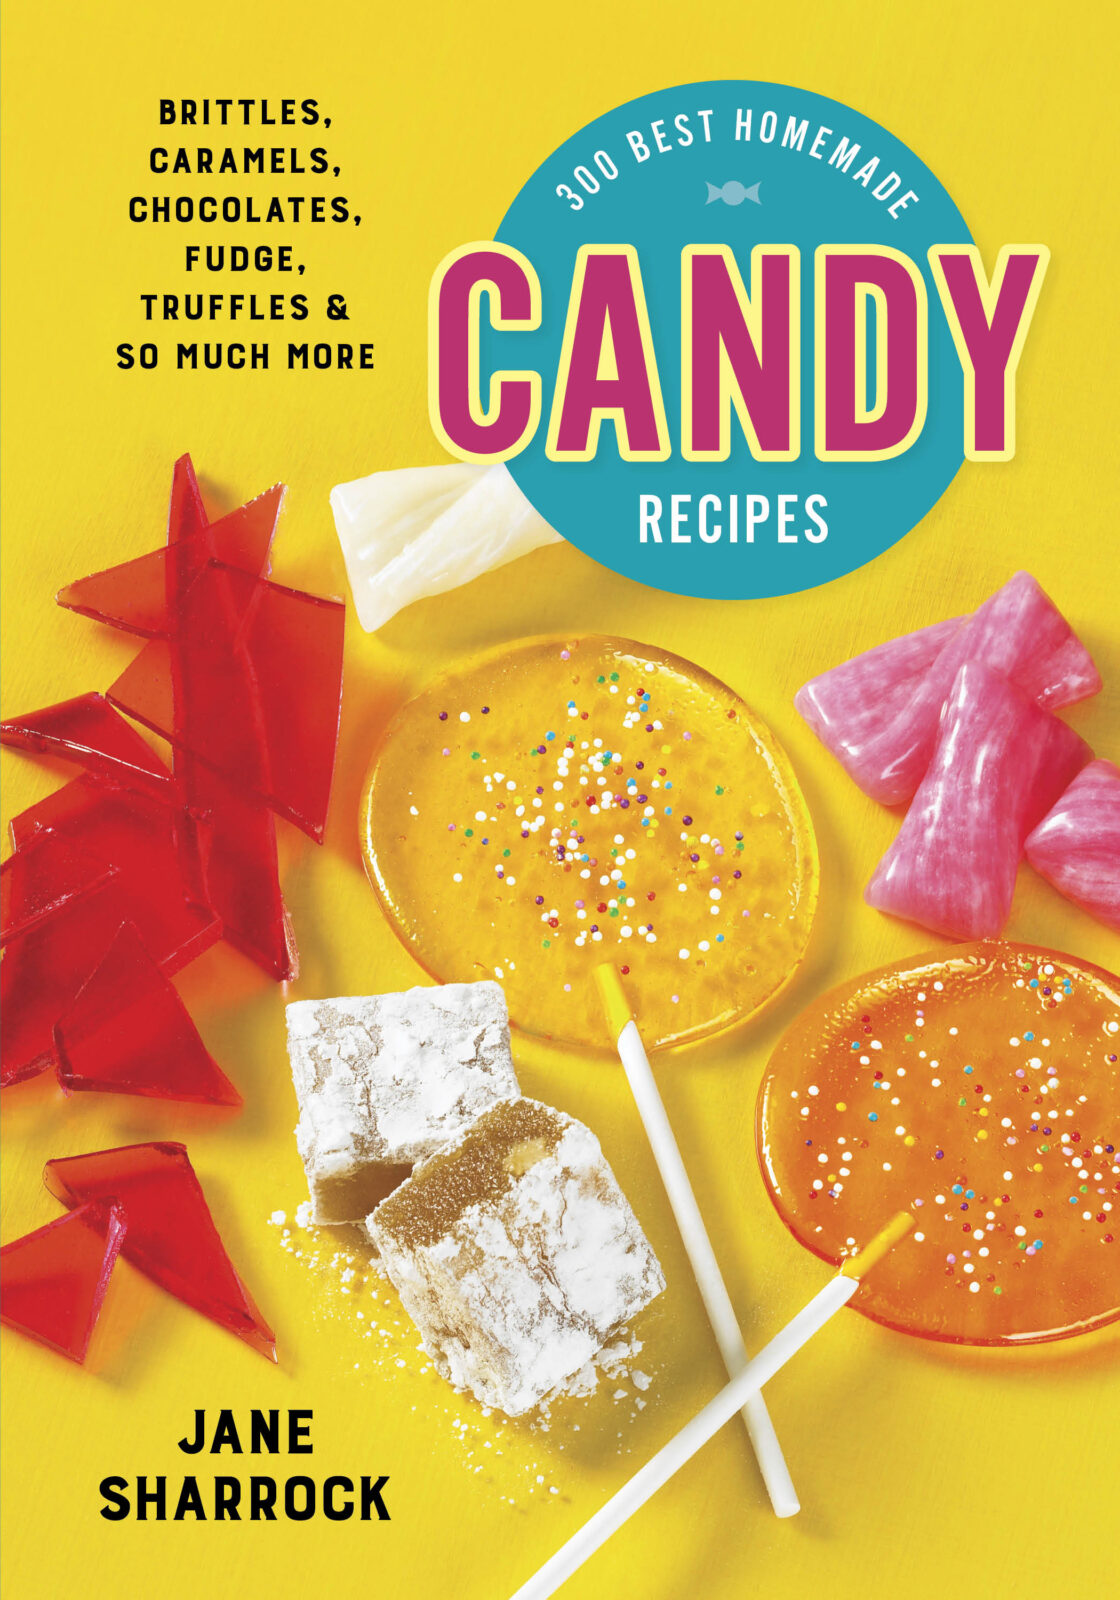 300 Best Homemade Candy Recipes